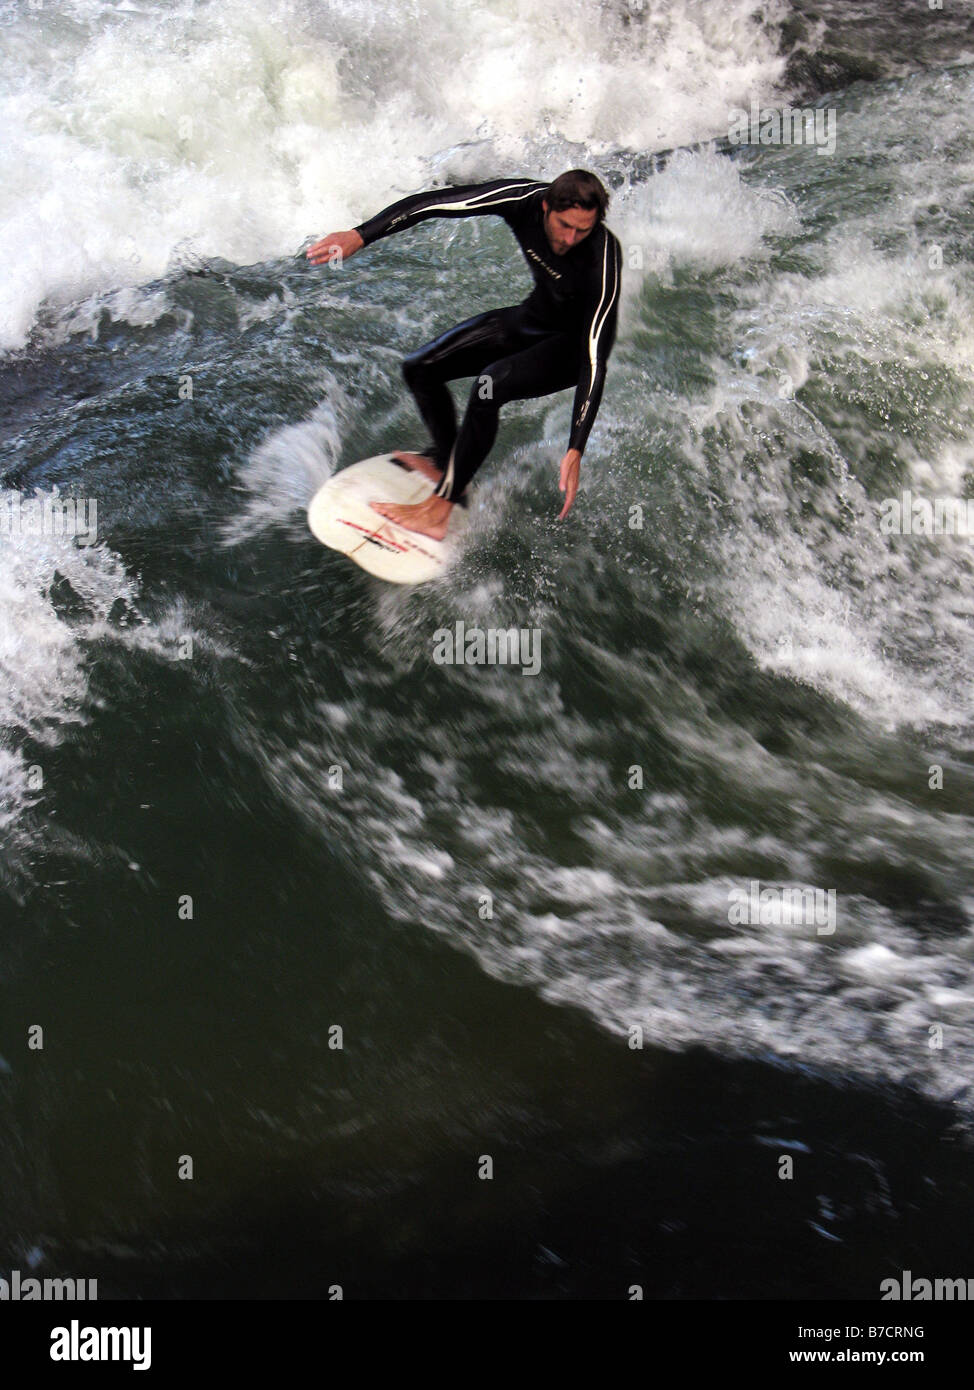 surfer on the so-called 'stehende Welle' (standing wave) of the Eisbach (branch of the river Isar) in the Englisch Garden, Germ Stock Photo